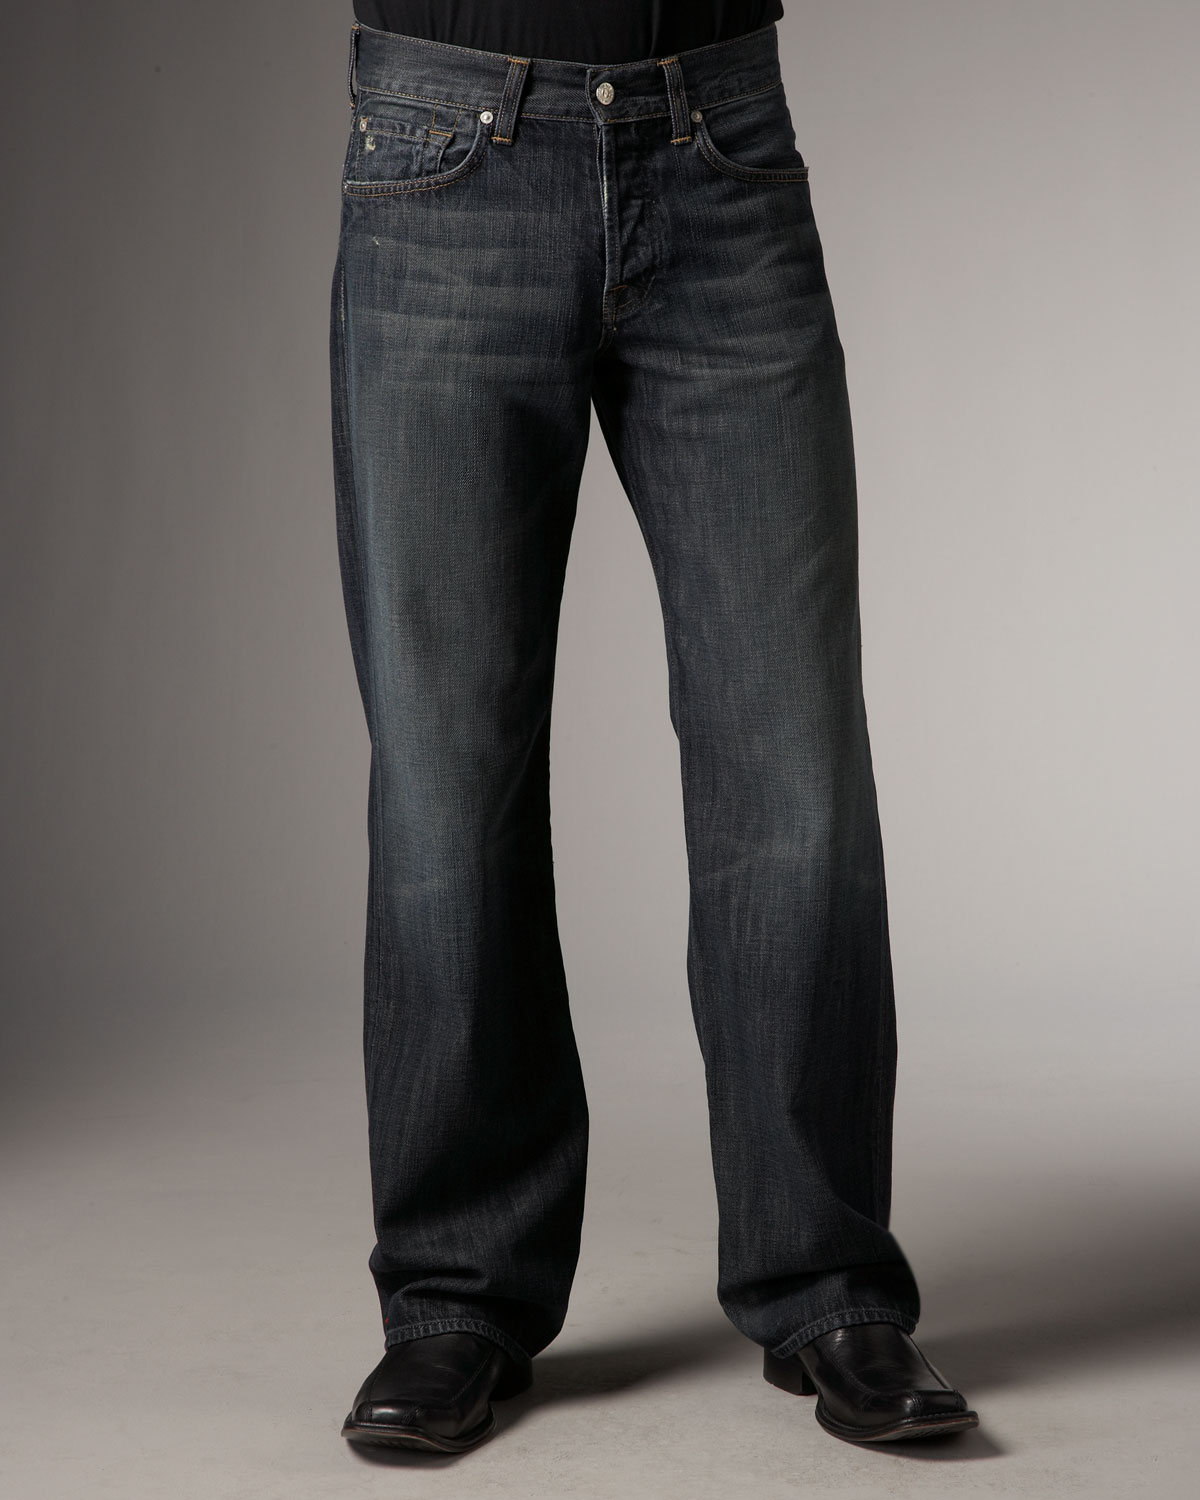 7 For All Mankind Montana Relaxed Jeans in Dark Blue (Black) for Men - Lyst